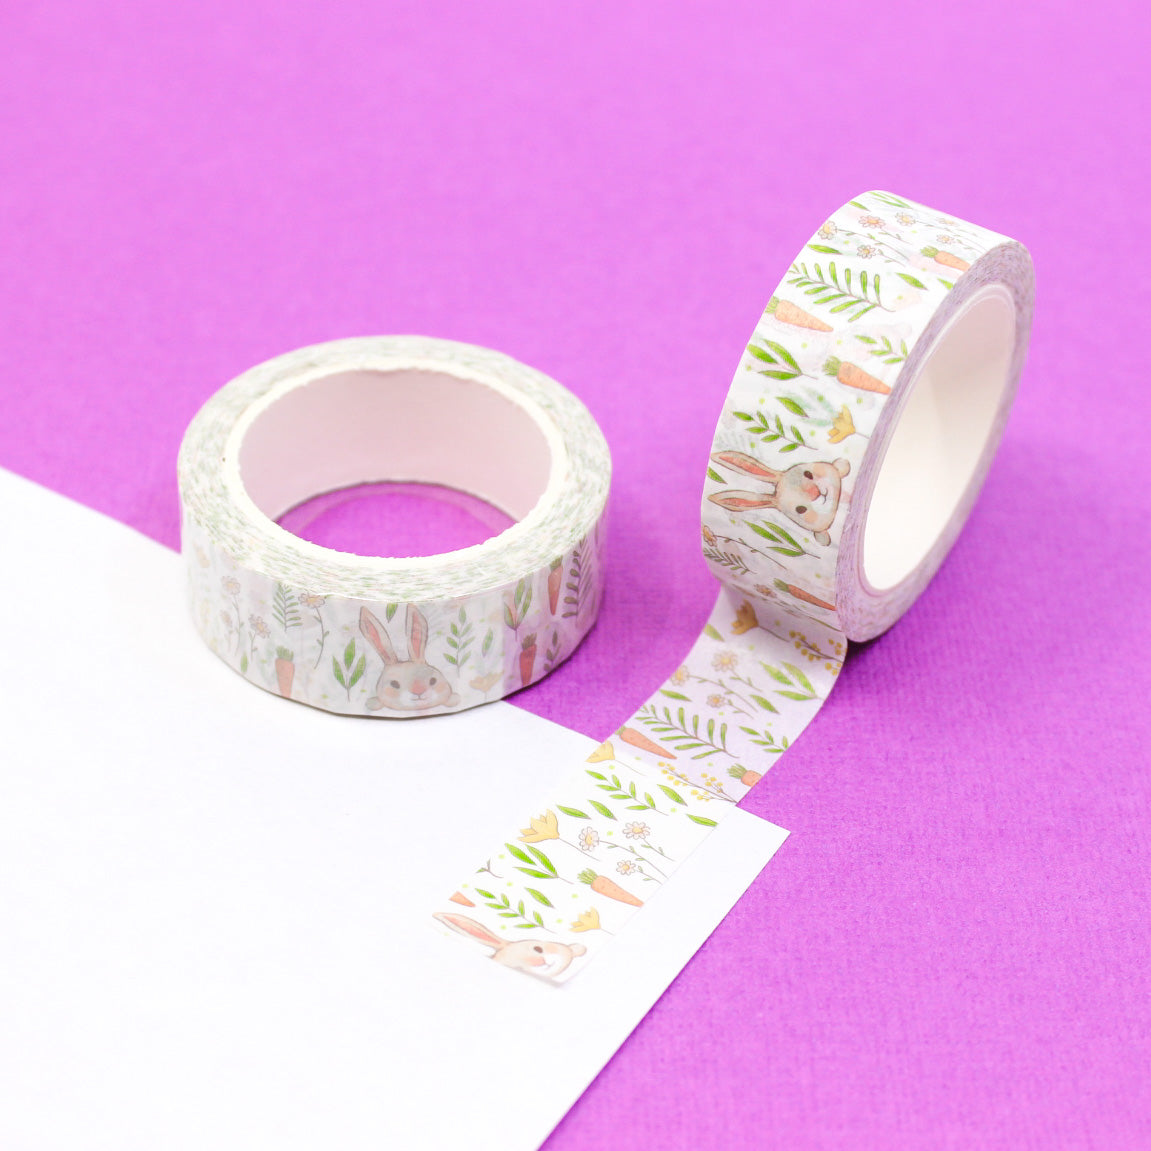 This cute washi tape features charming rabbits and carrots, perfect for adding a playful touch to your crafts. Ideal for Easter, springtime, or any whimsical project. This tape is sold at BBB Supplies Craft Shop.